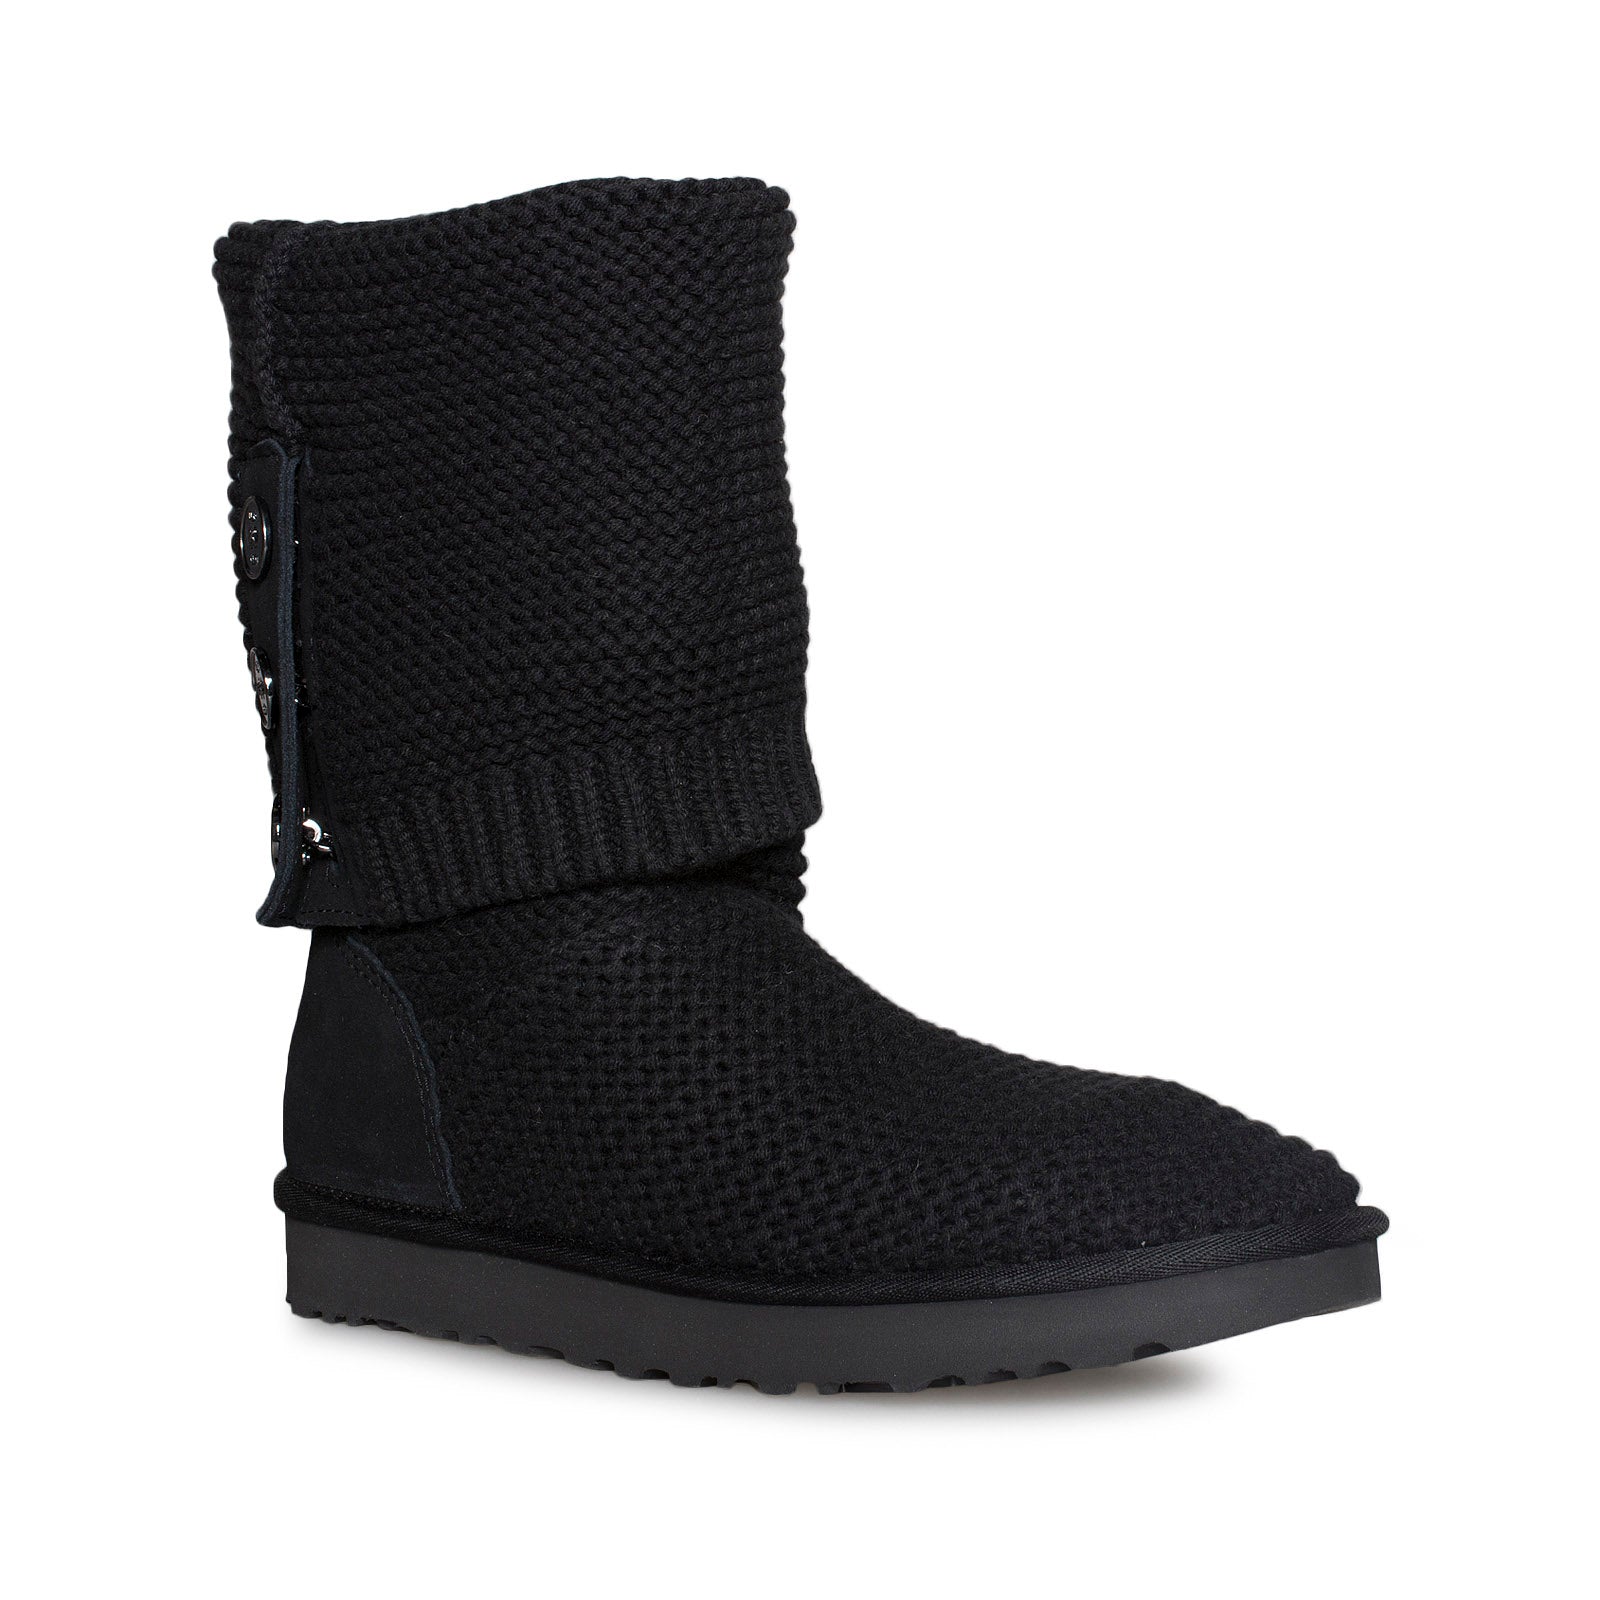 purl cardy knit boot ugg